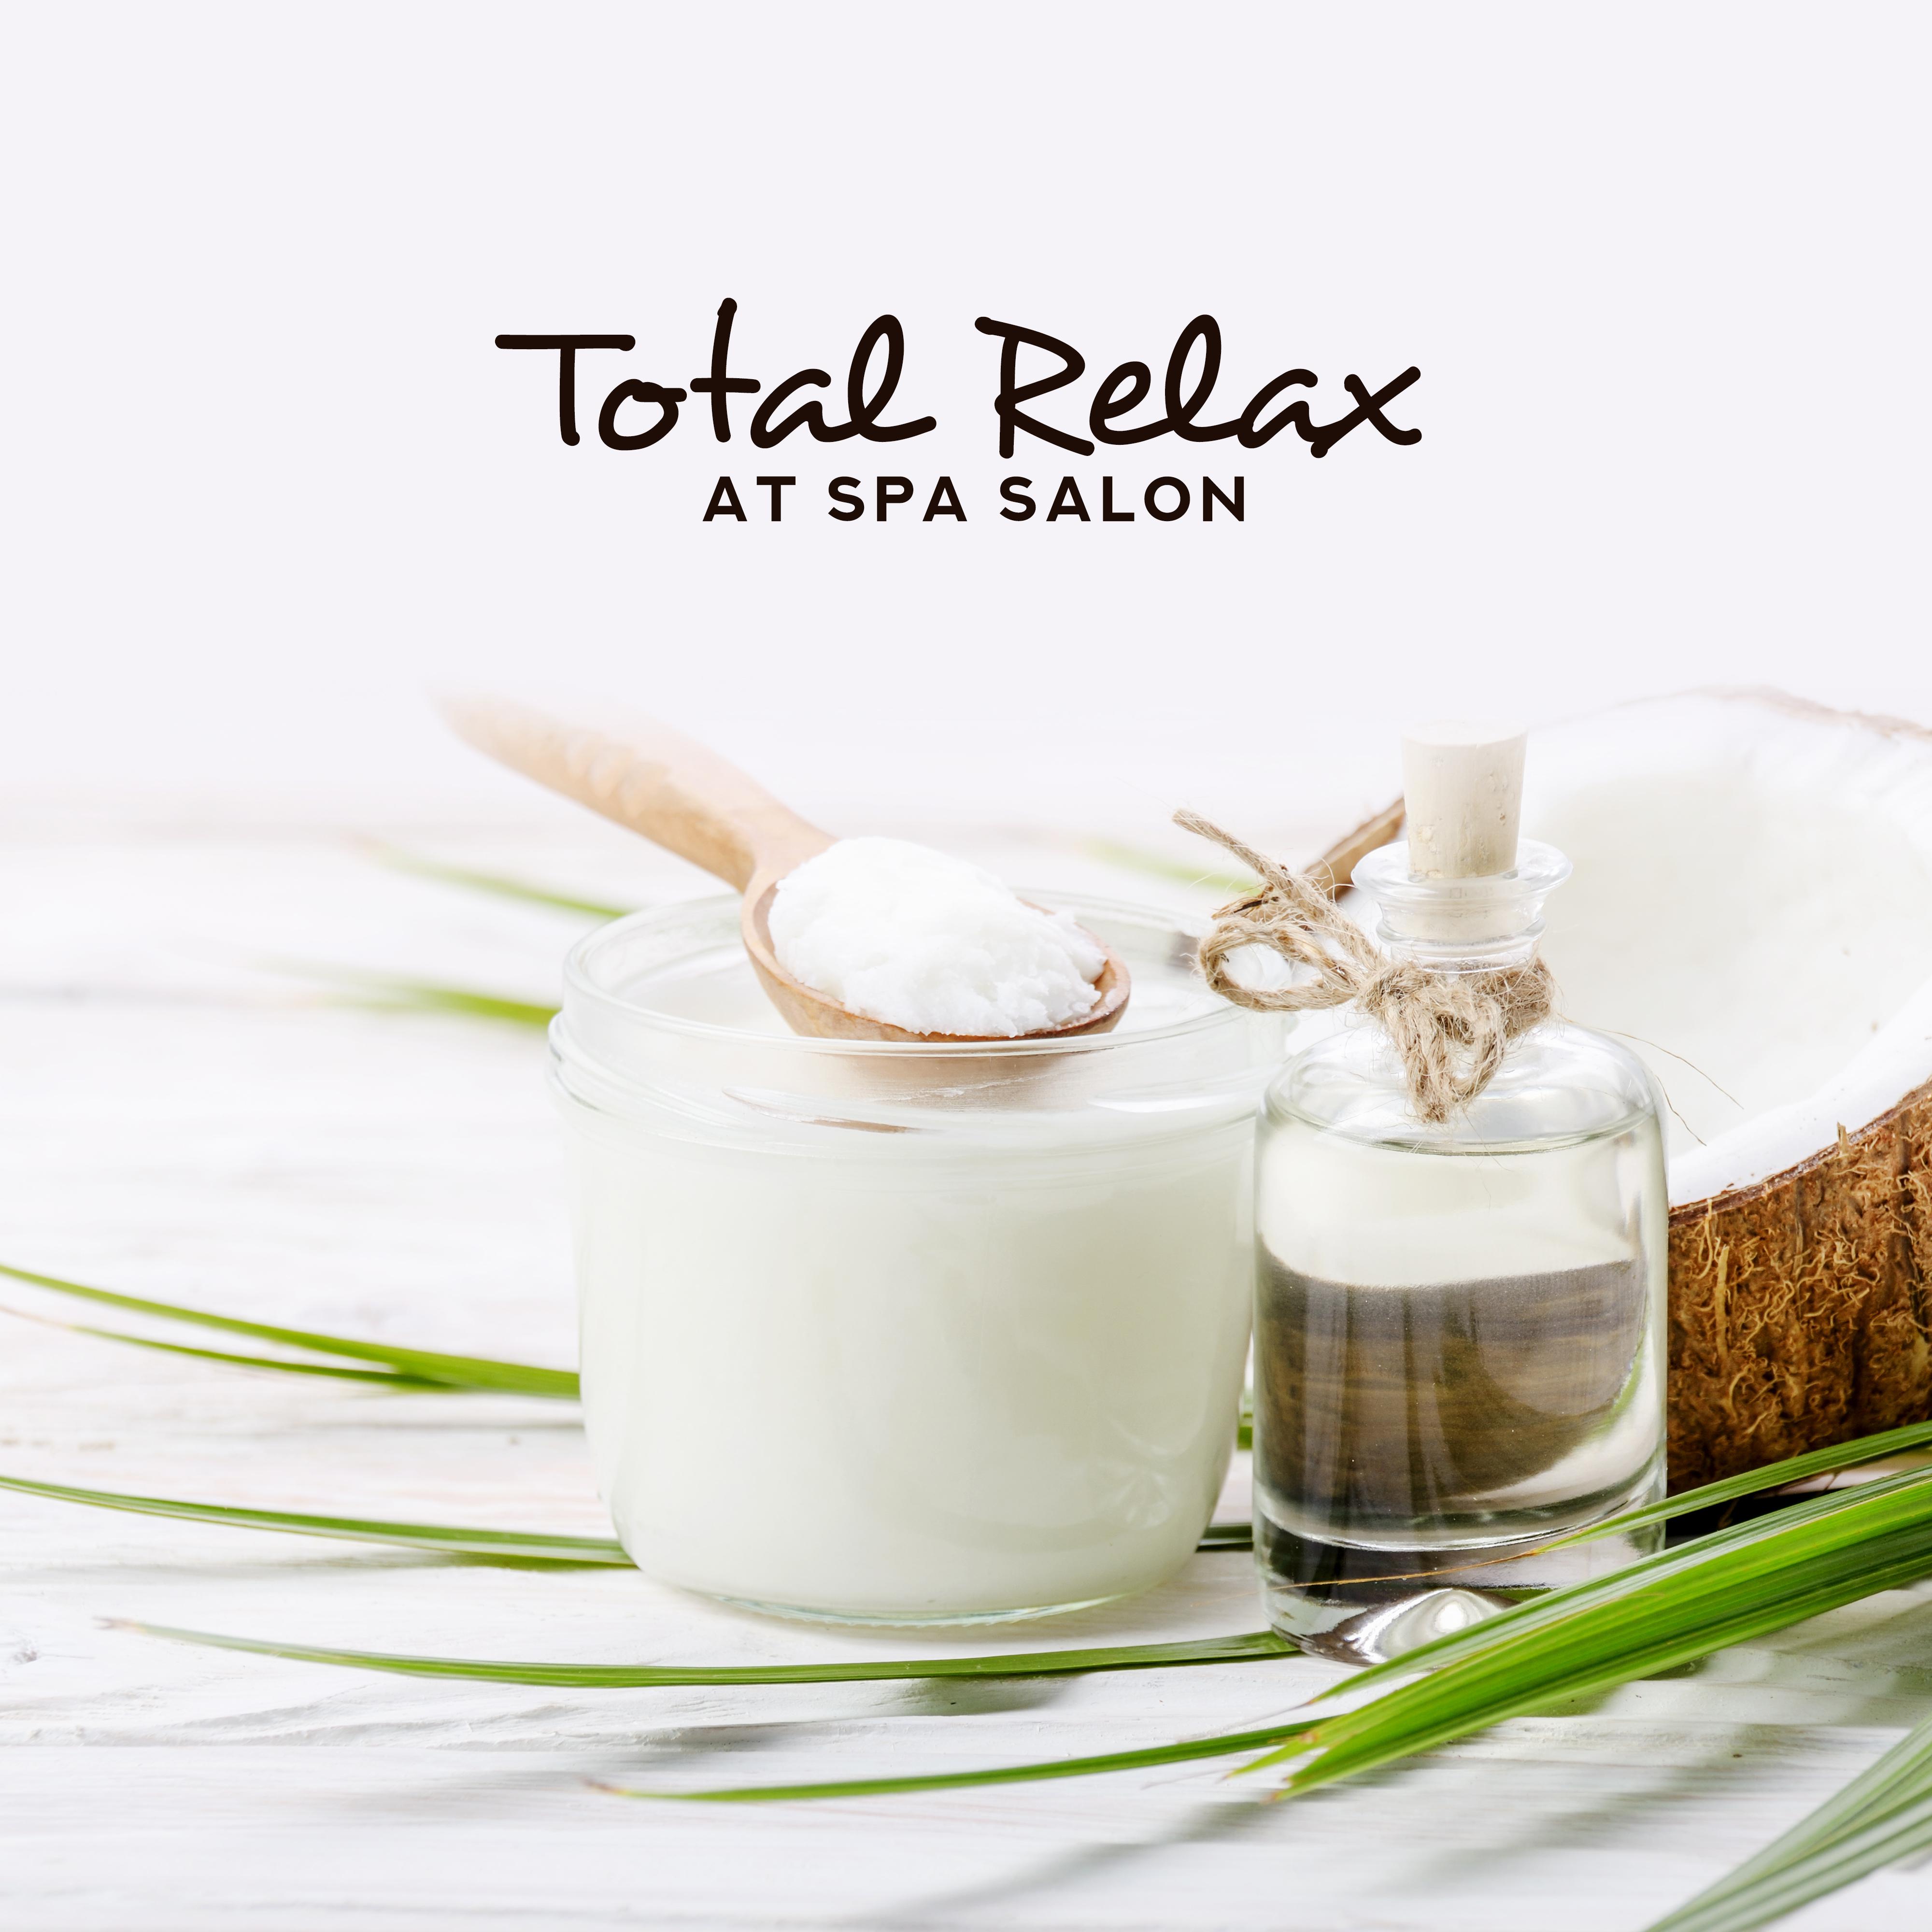 Total Relax at Spa Salon: 2019 New Age Music Collection for Spa, Wellness, Massage Therapy, Hot Baths & Sauna Session